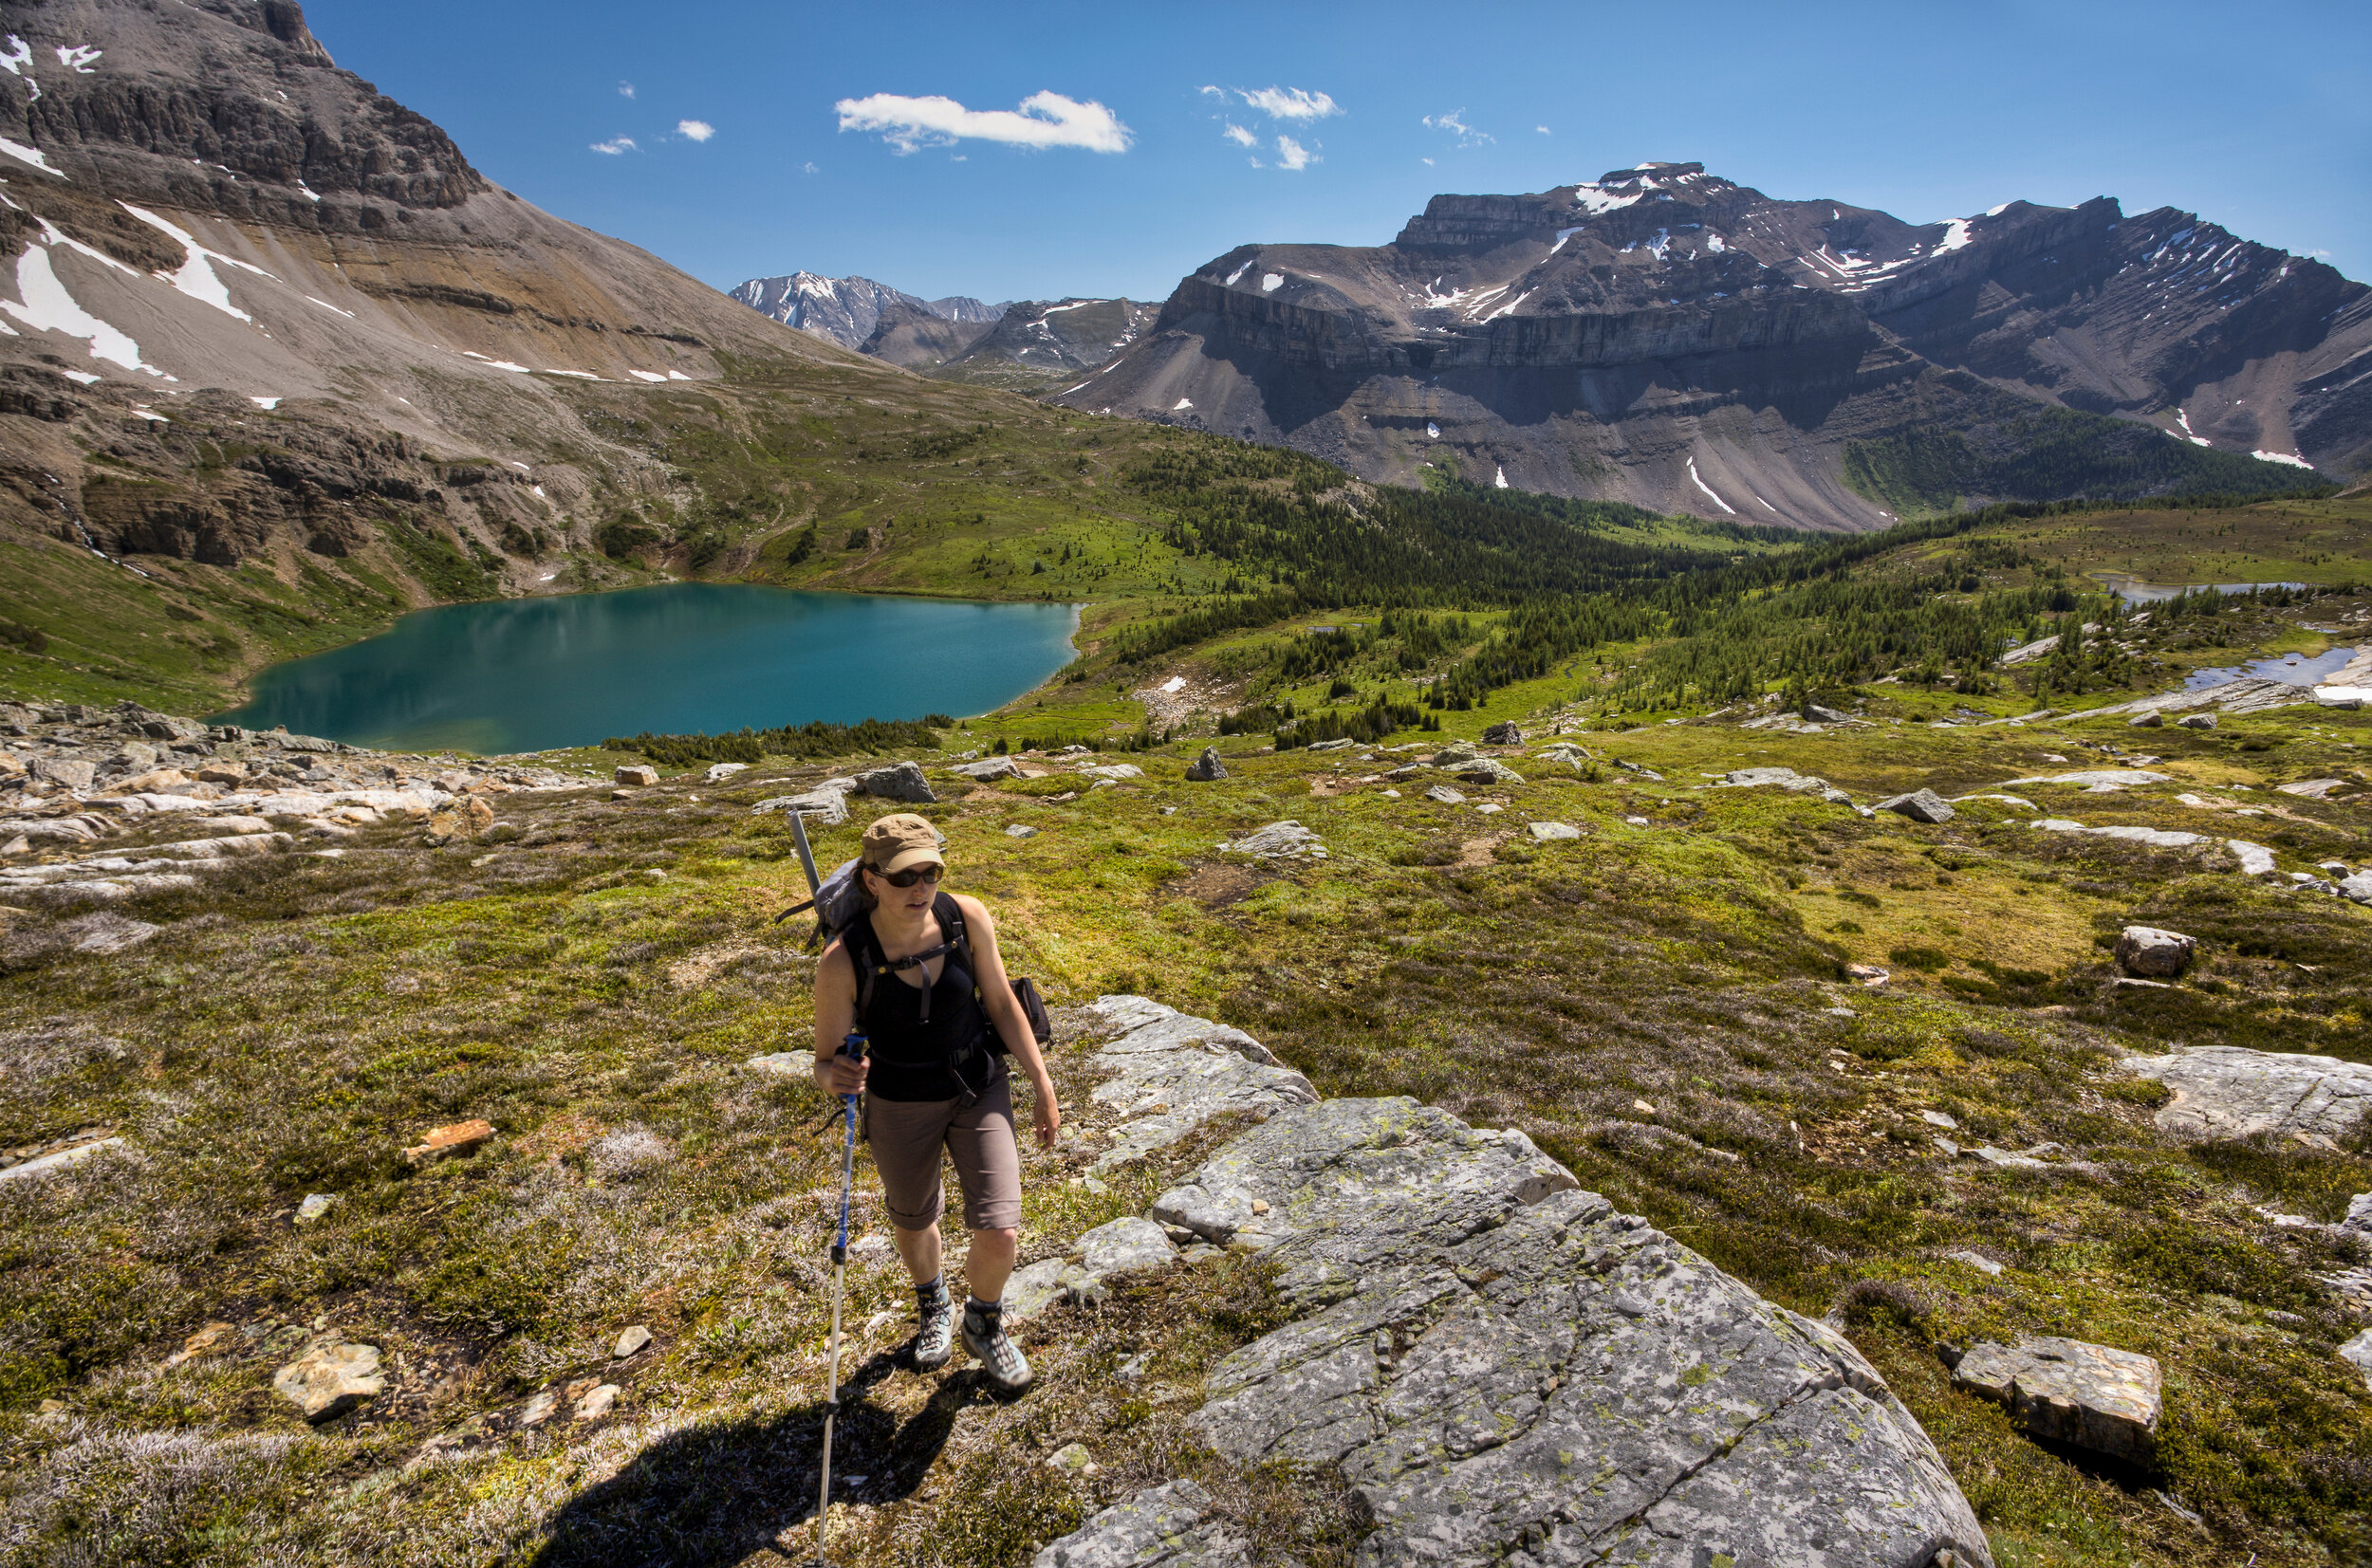  Scrambling up Mt. Richardson with Hidden Lake in the background. Photo by Paul Zizka 